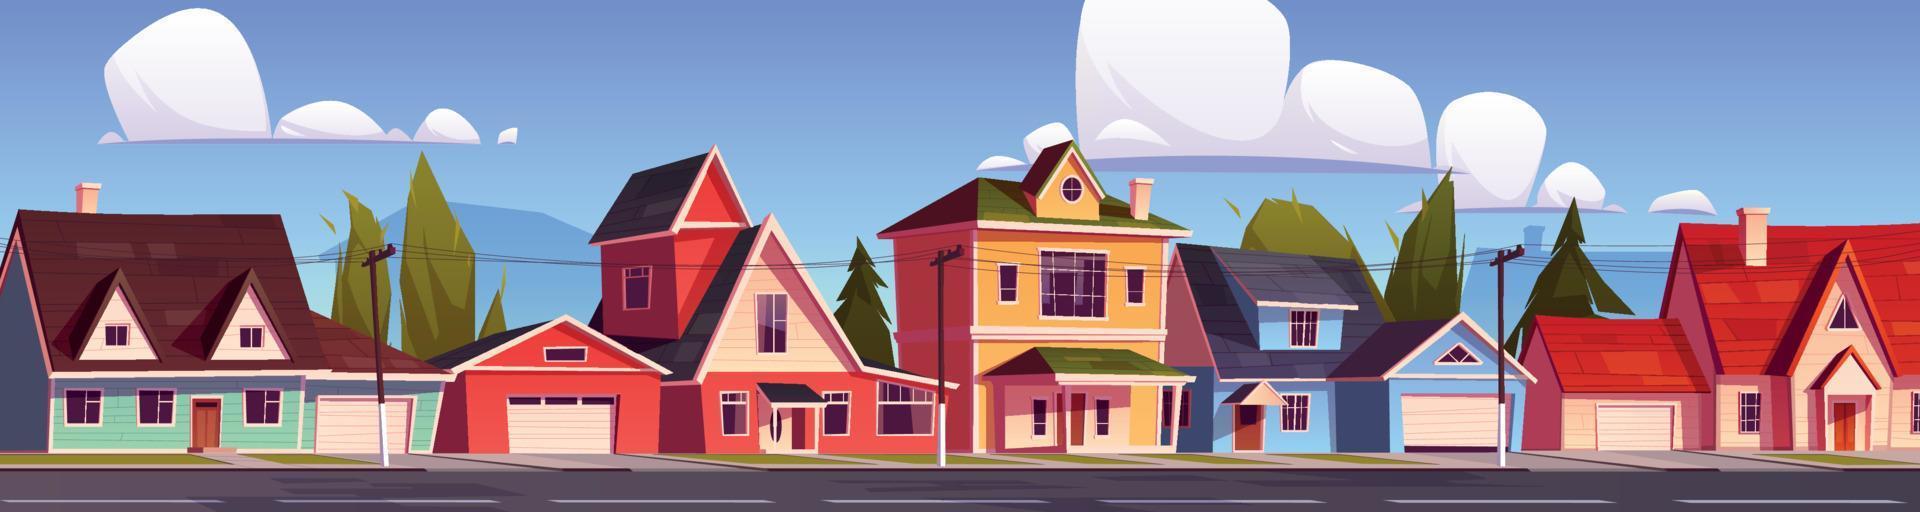 Suburb houses, suburban street with cottages. vector